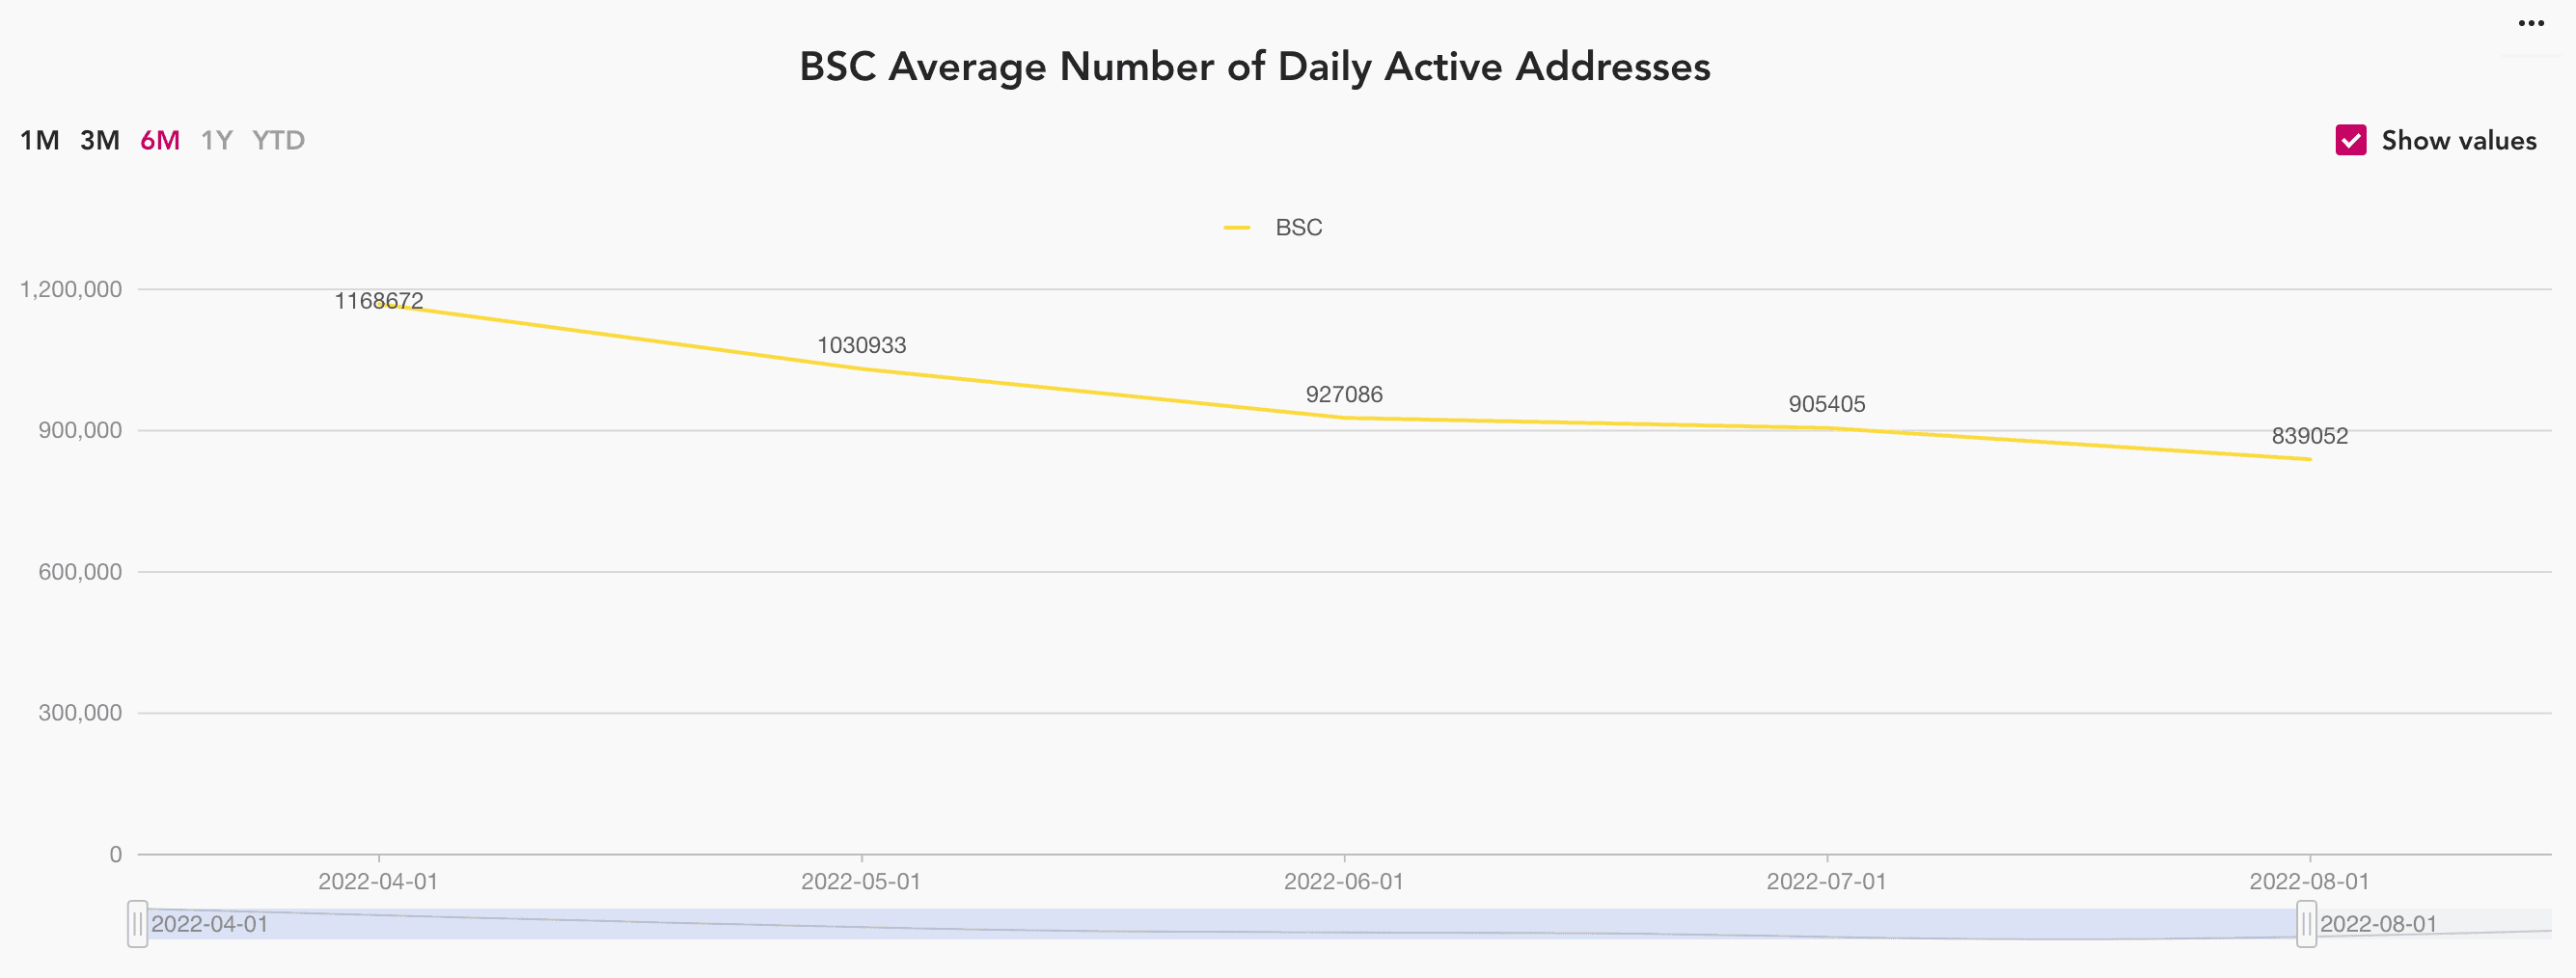 BSC average number of daily active addresses